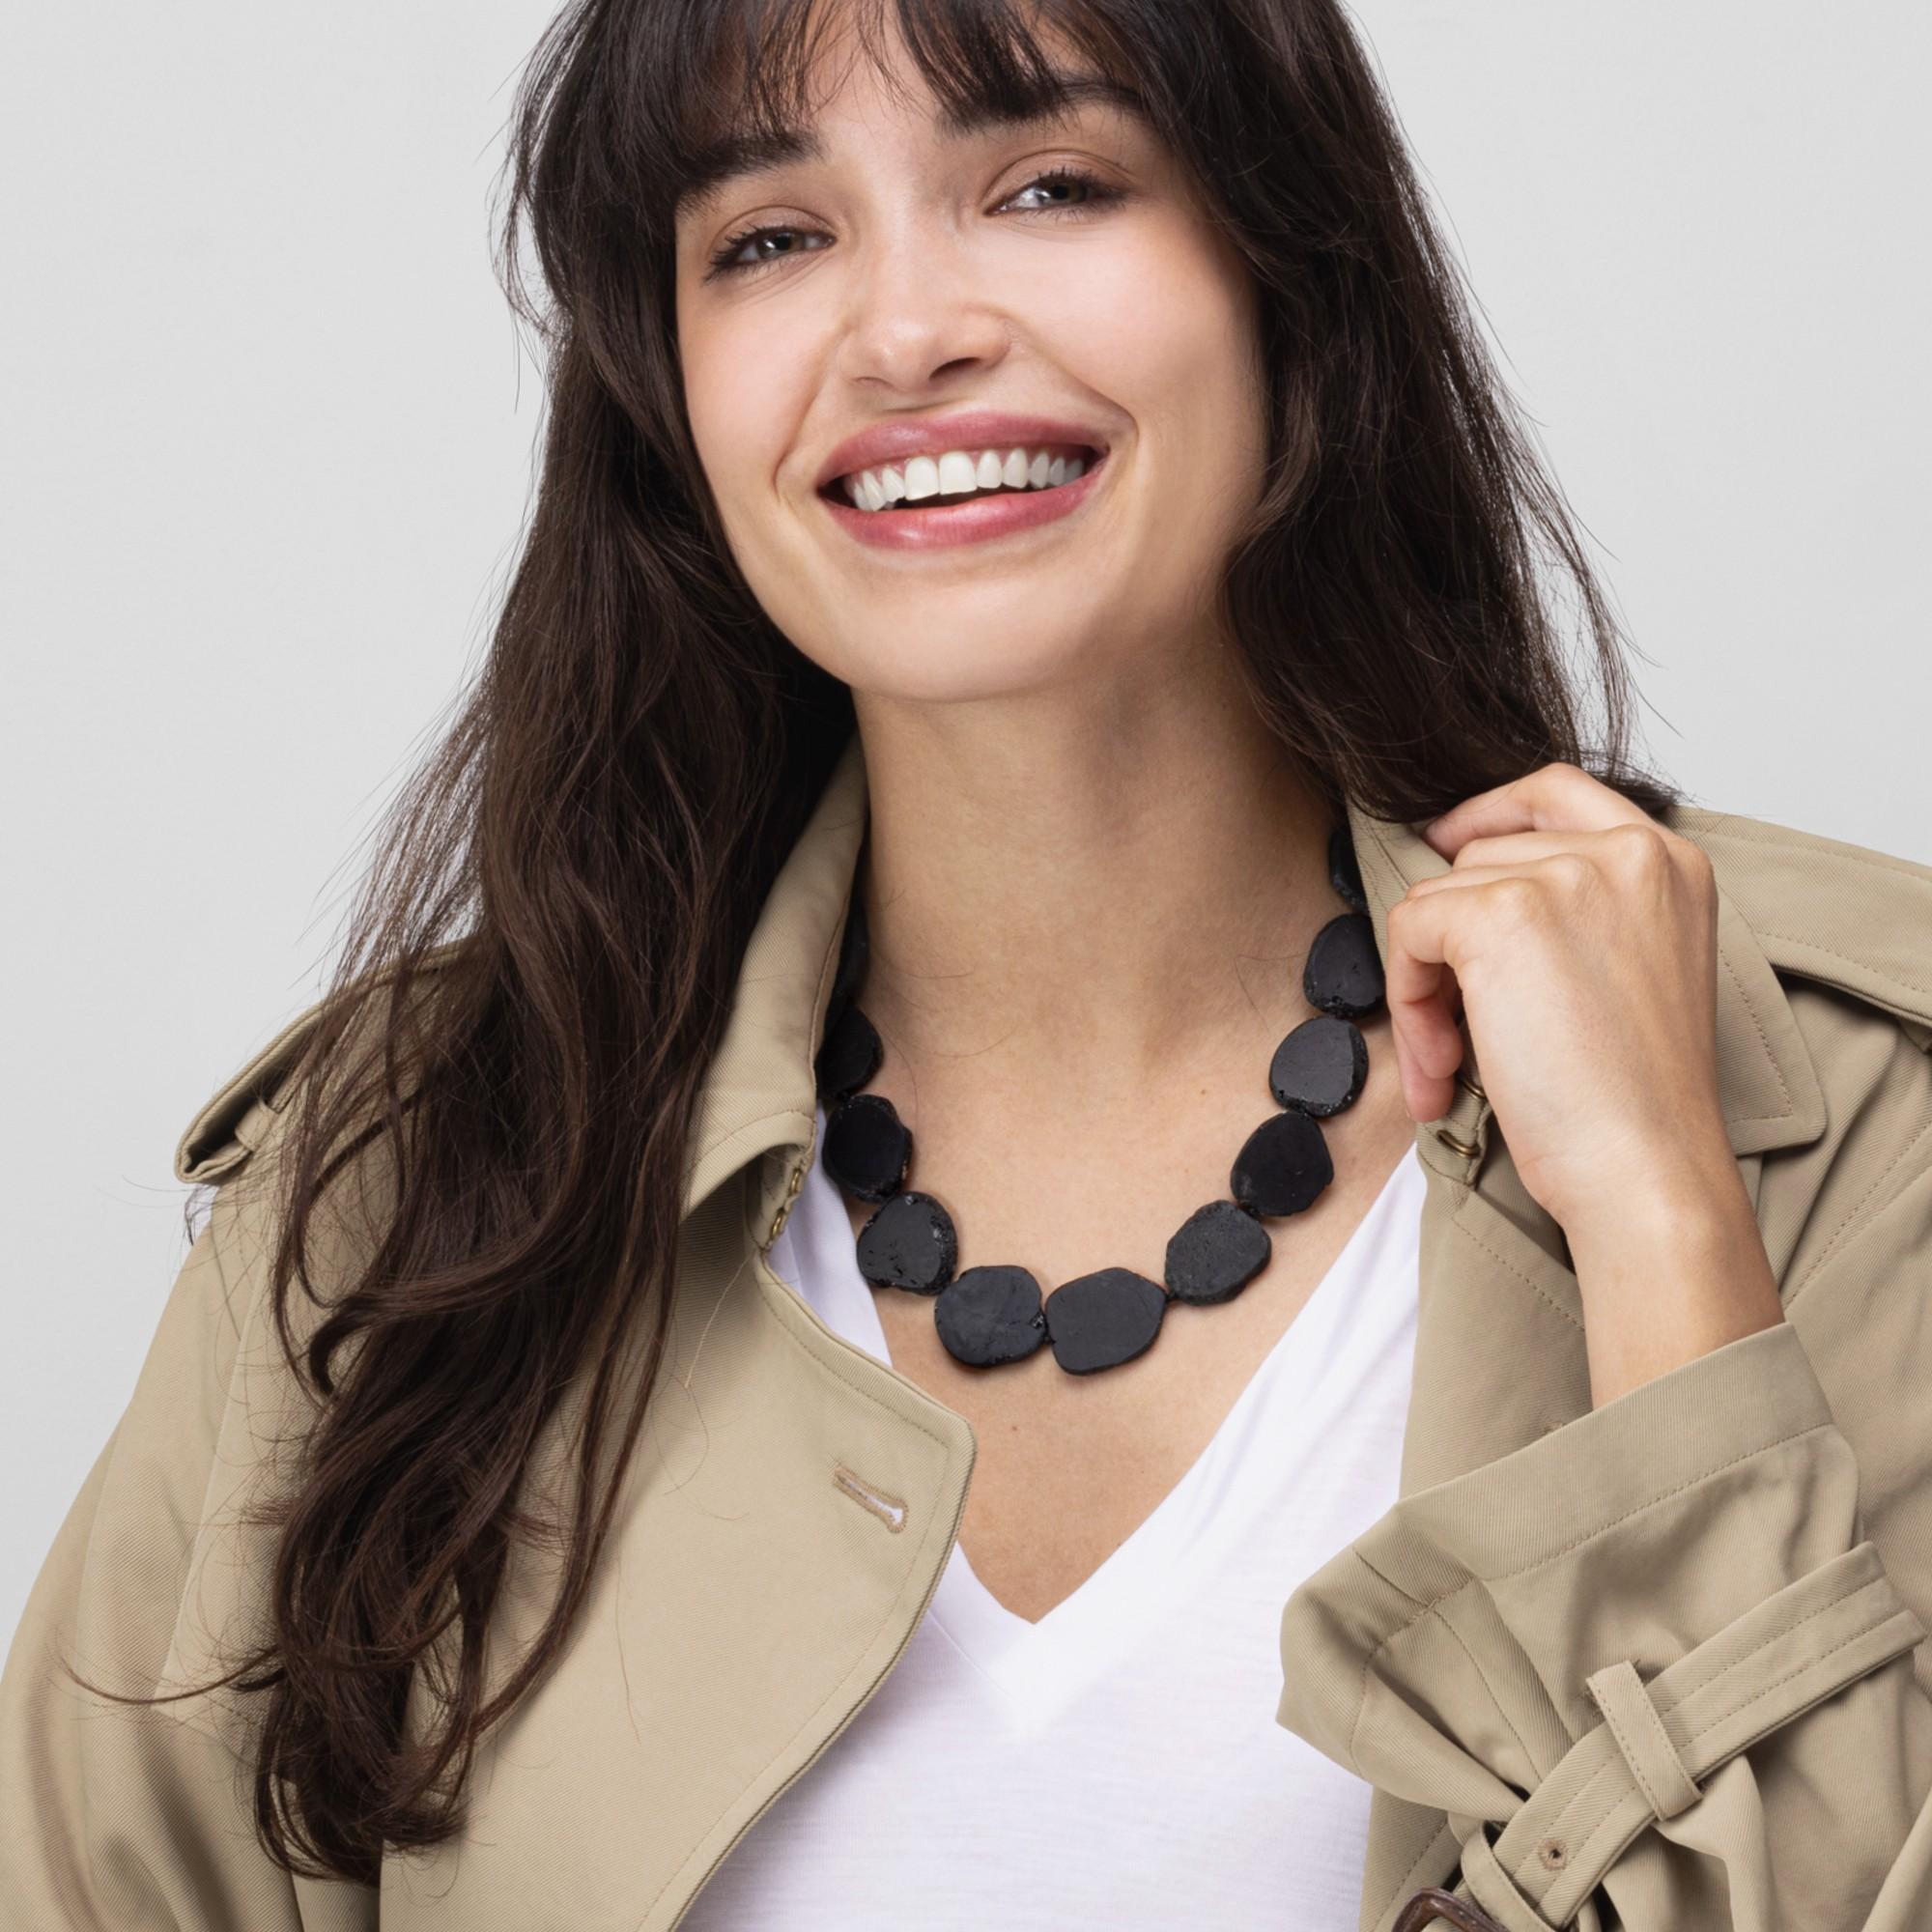 Alex Jona design collection black tourmaline necklace with brushed sterling silver clasp. 
Dimensions: 18.89 in. L x 0.94 in. W. -  48 cm. L x 2.3 cm. W

Alex Jona jewels stand out, not only for their special design and for the excellent quality of